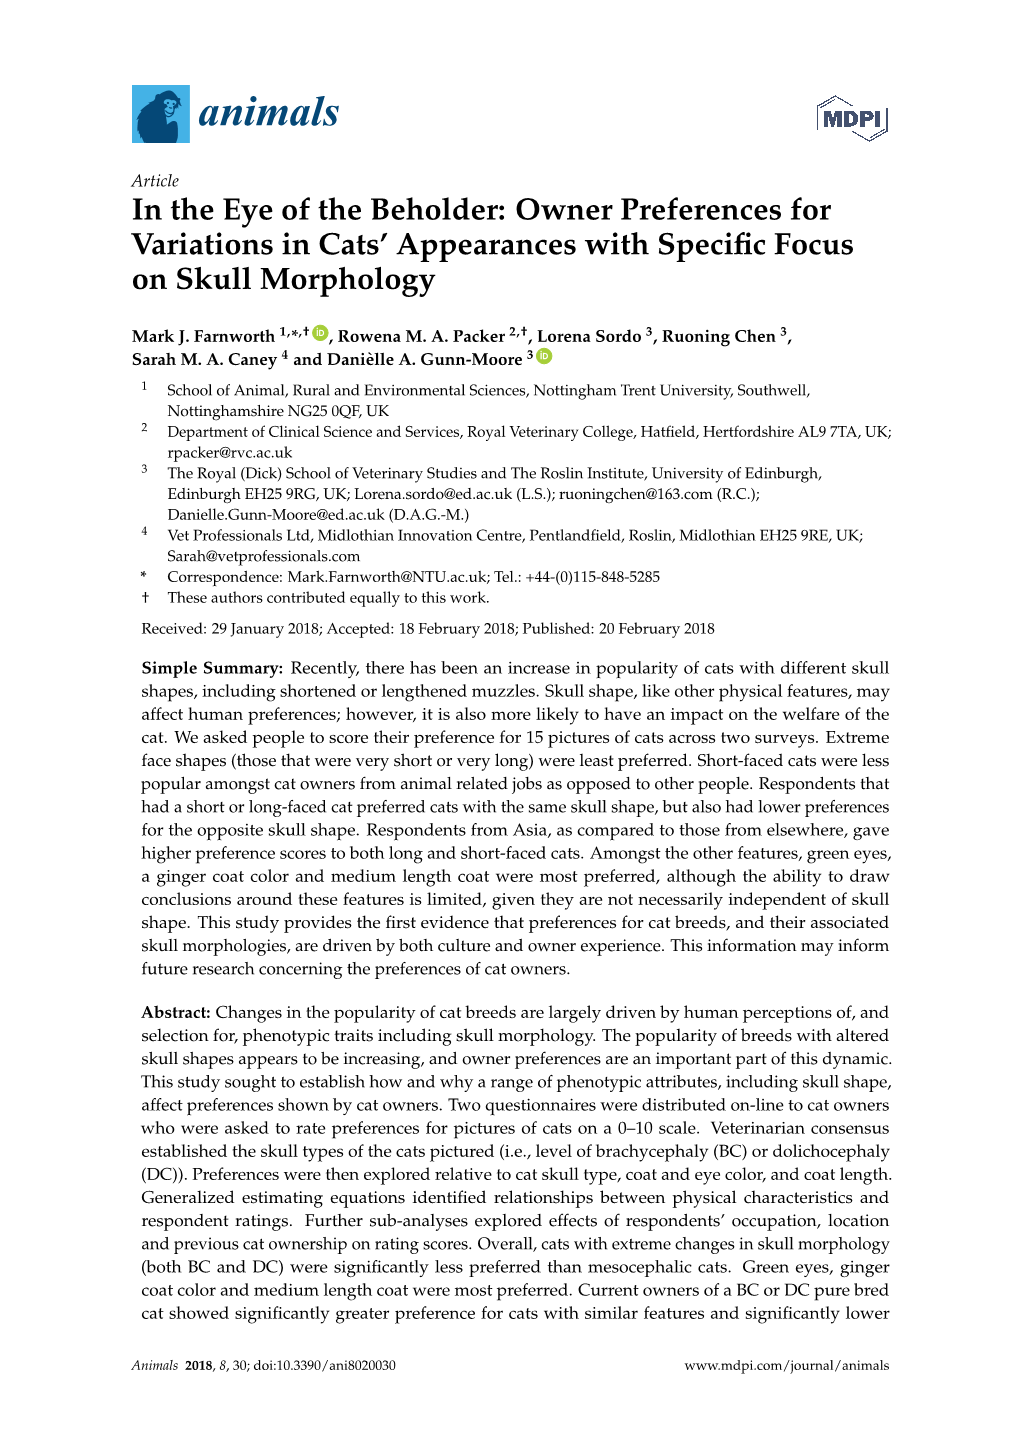 In the Eye of the Beholder: Owner Preferences for Variations in Cats’ Appearances with Speciﬁc Focus on Skull Morphology